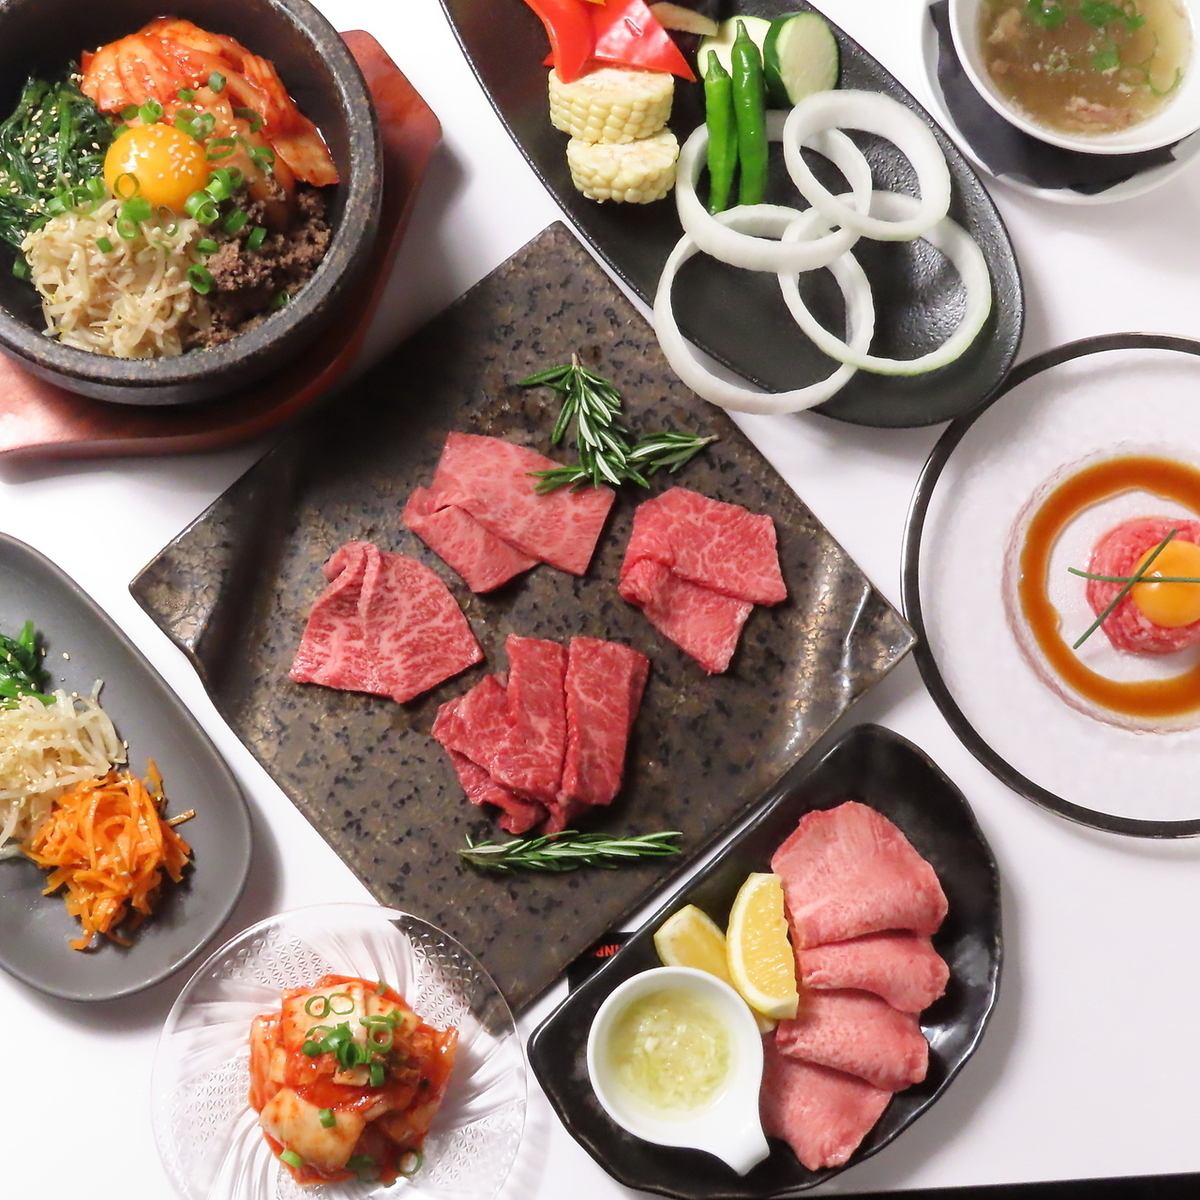 A high-quality yakiniku restaurant that will open in March 2022